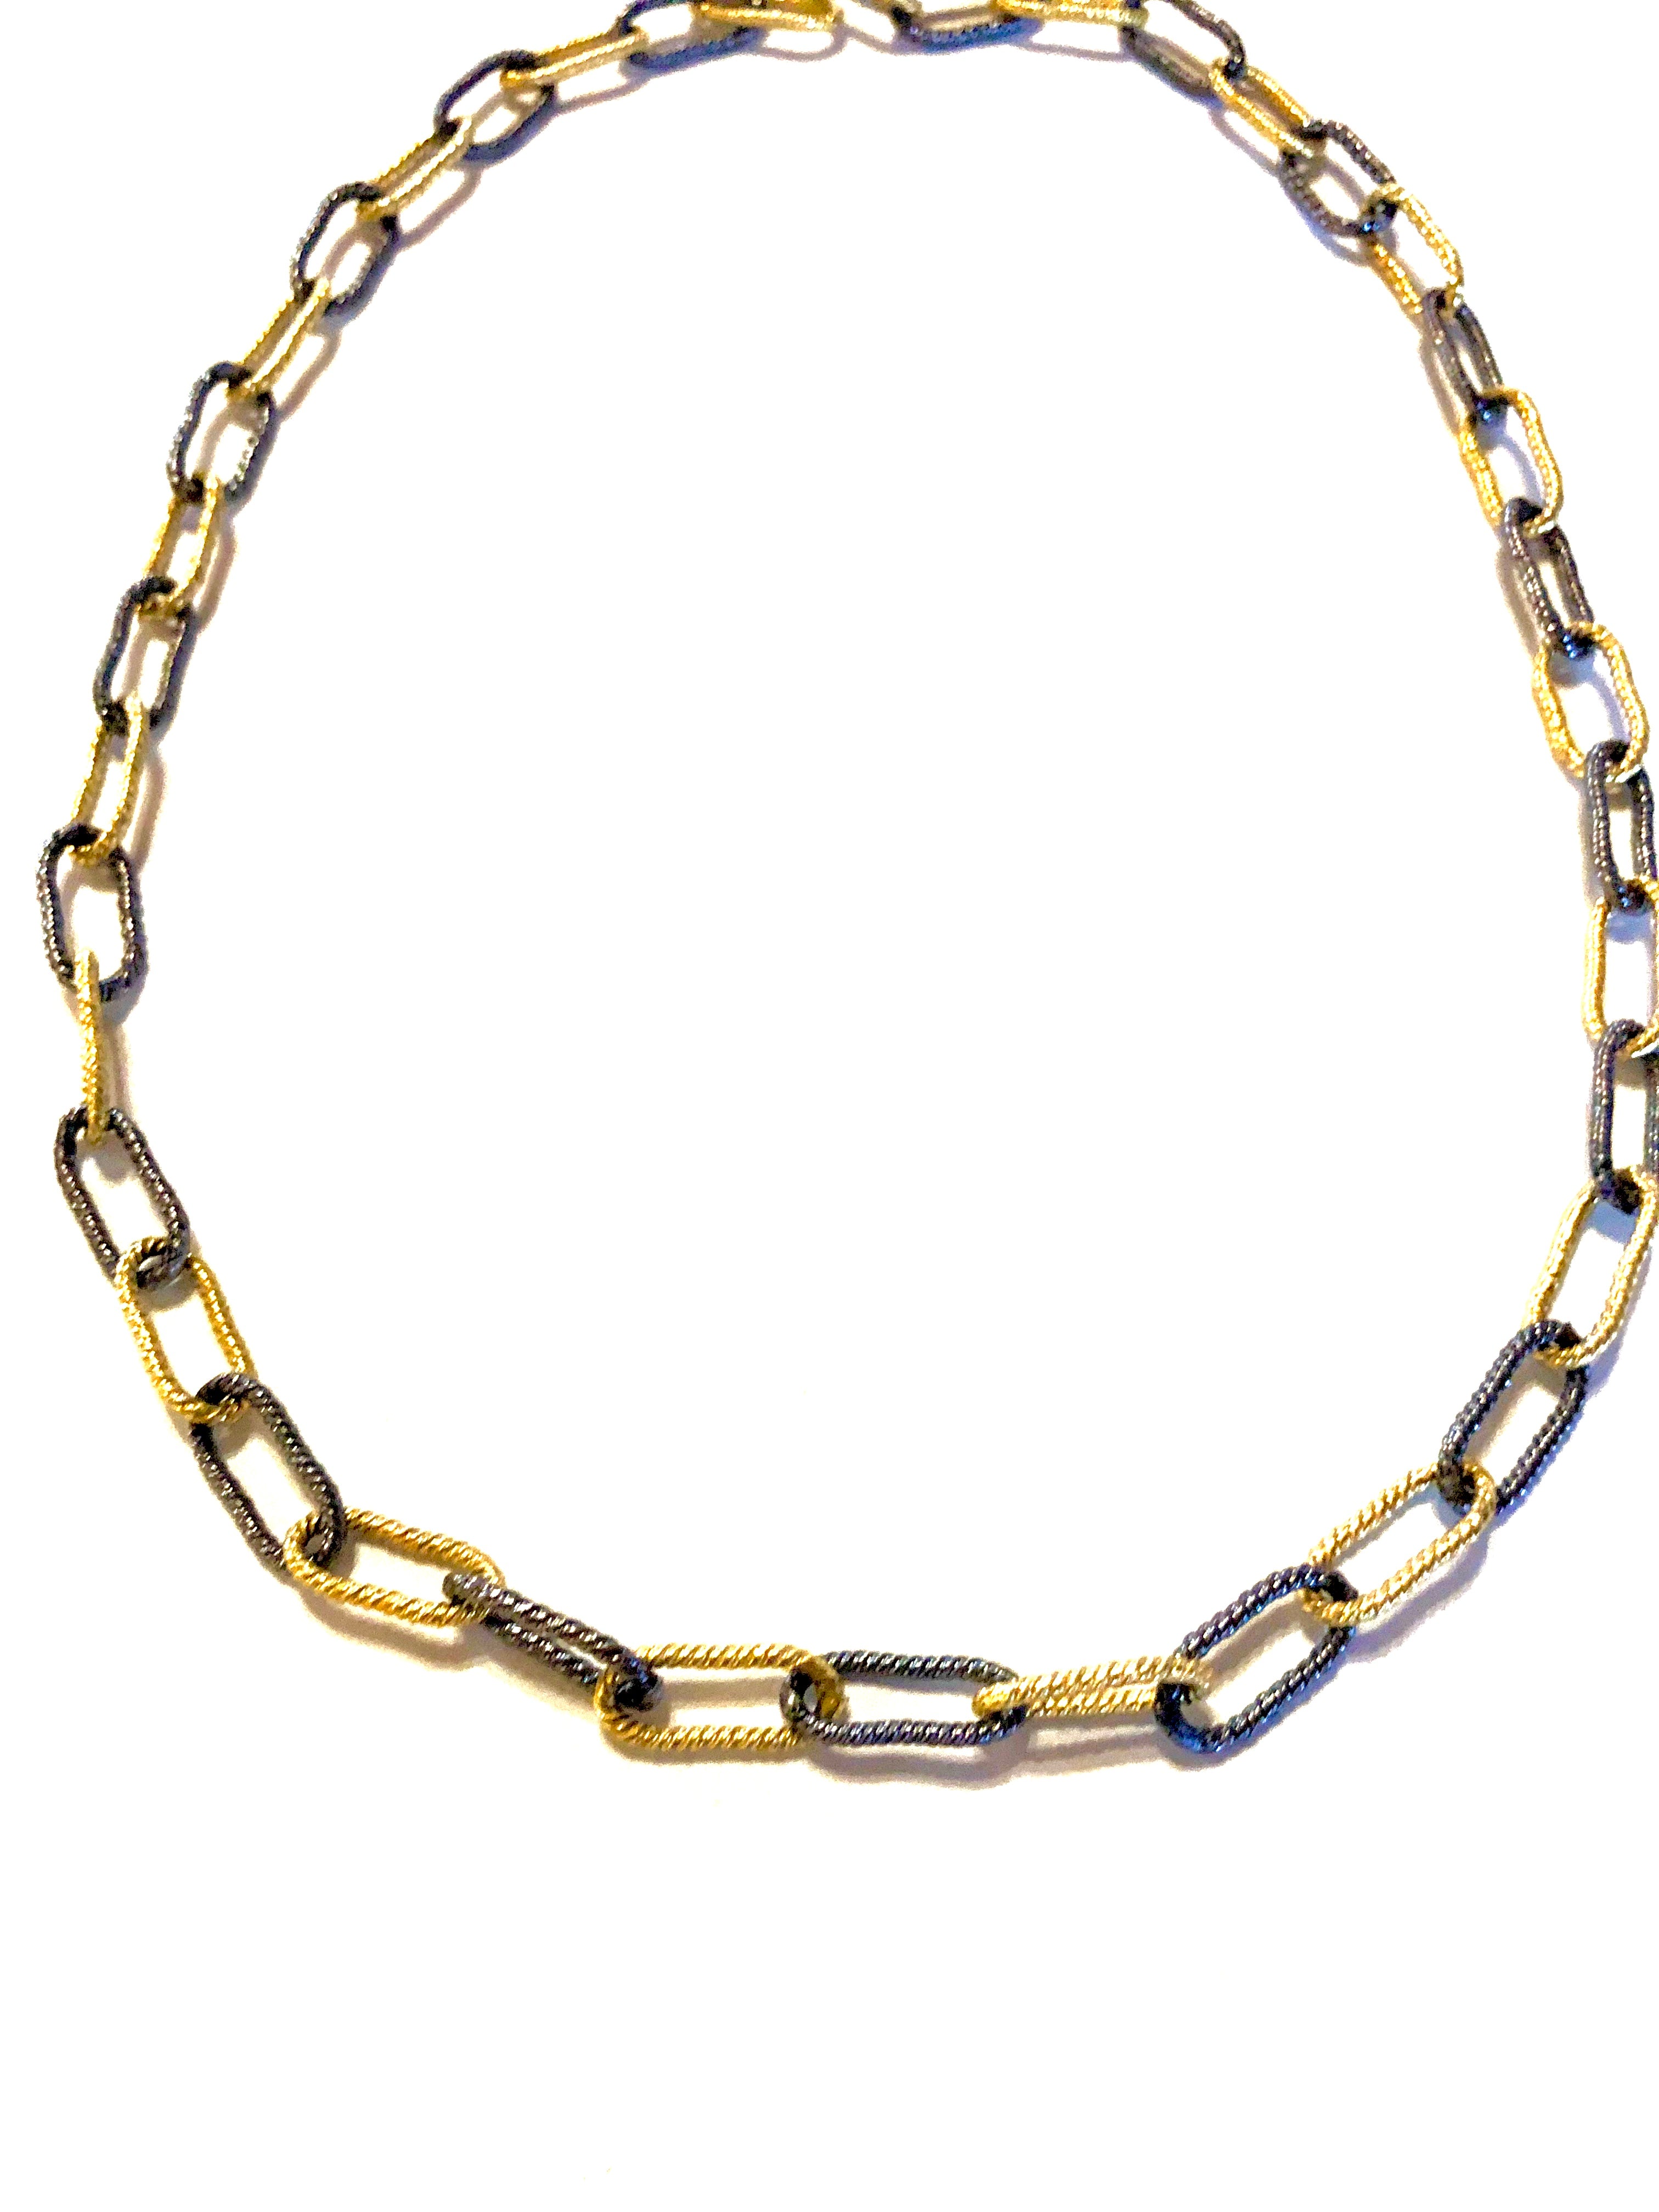 Paperclip - handmade sterling silver and vermeil chain necklace with gold-filled magnetic closure